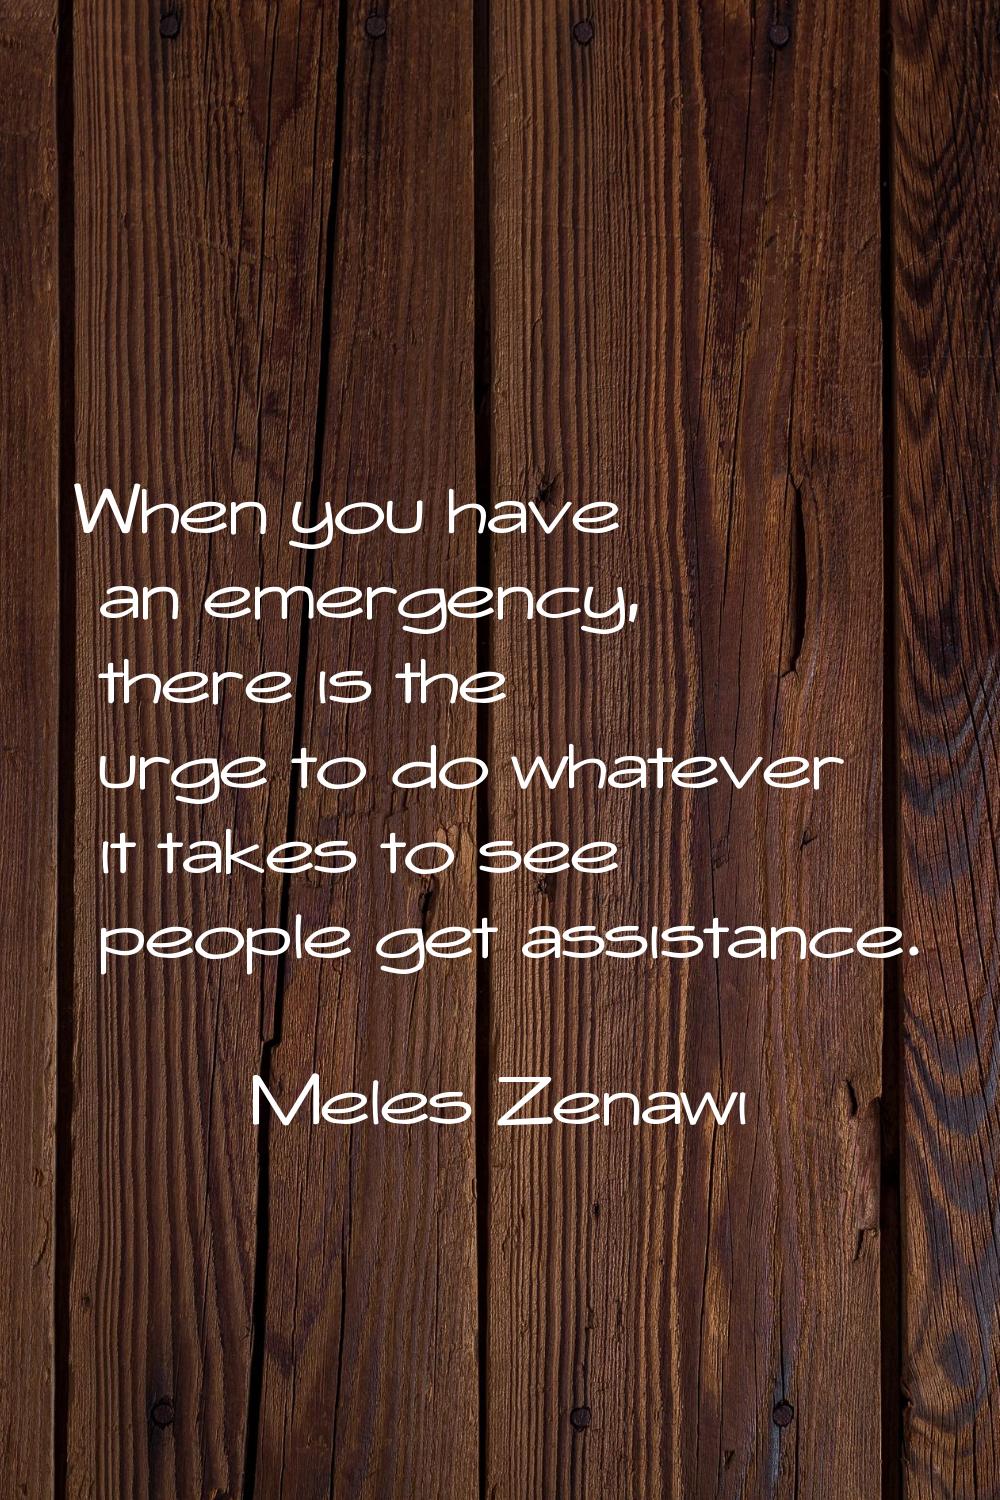 When you have an emergency, there is the urge to do whatever it takes to see people get assistance.